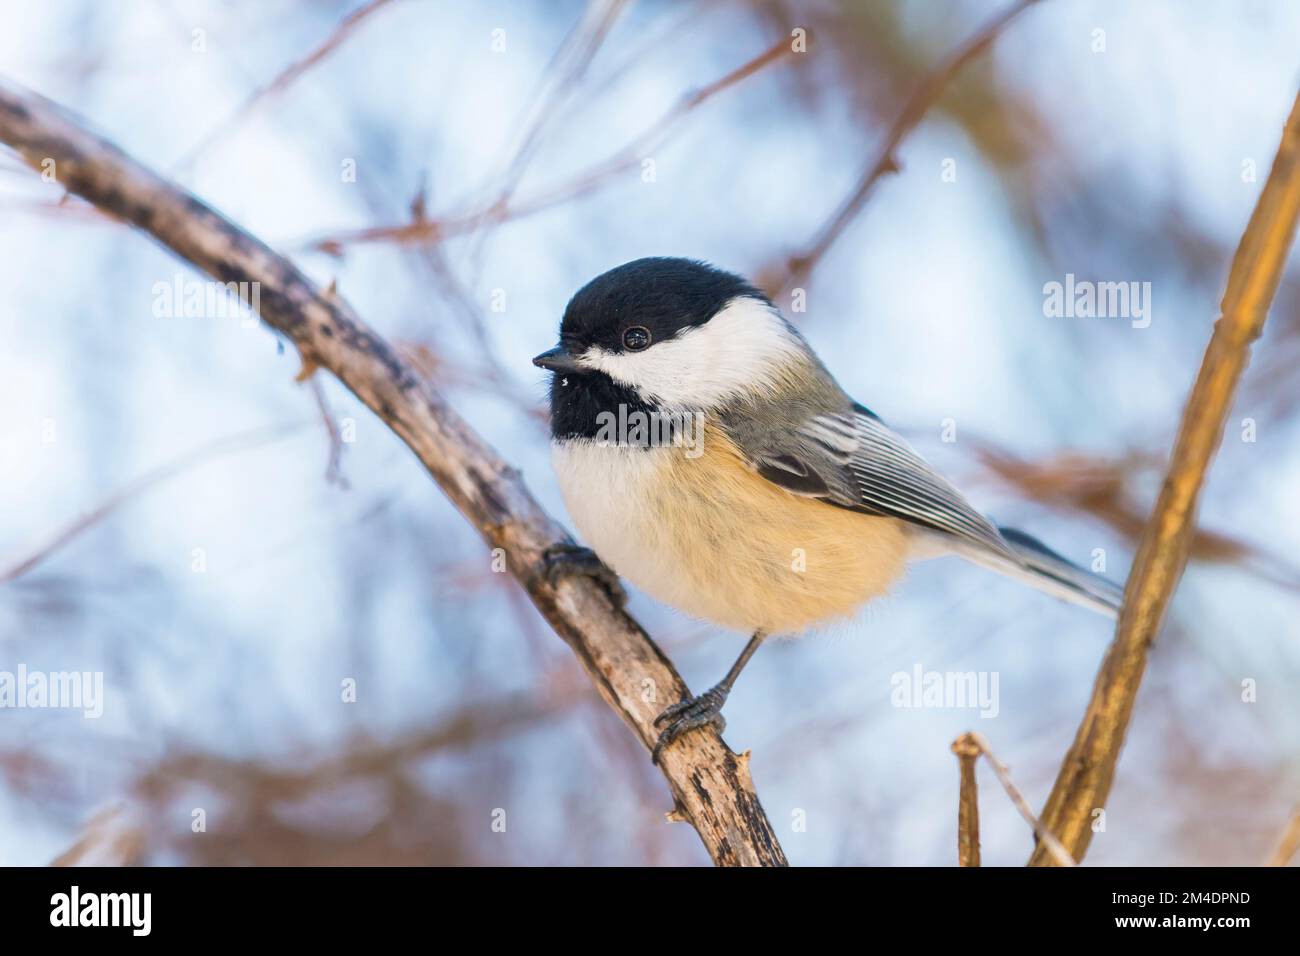 Black-capped chickadee (Poecile Atricapillus) perched on a branch Stock Photo